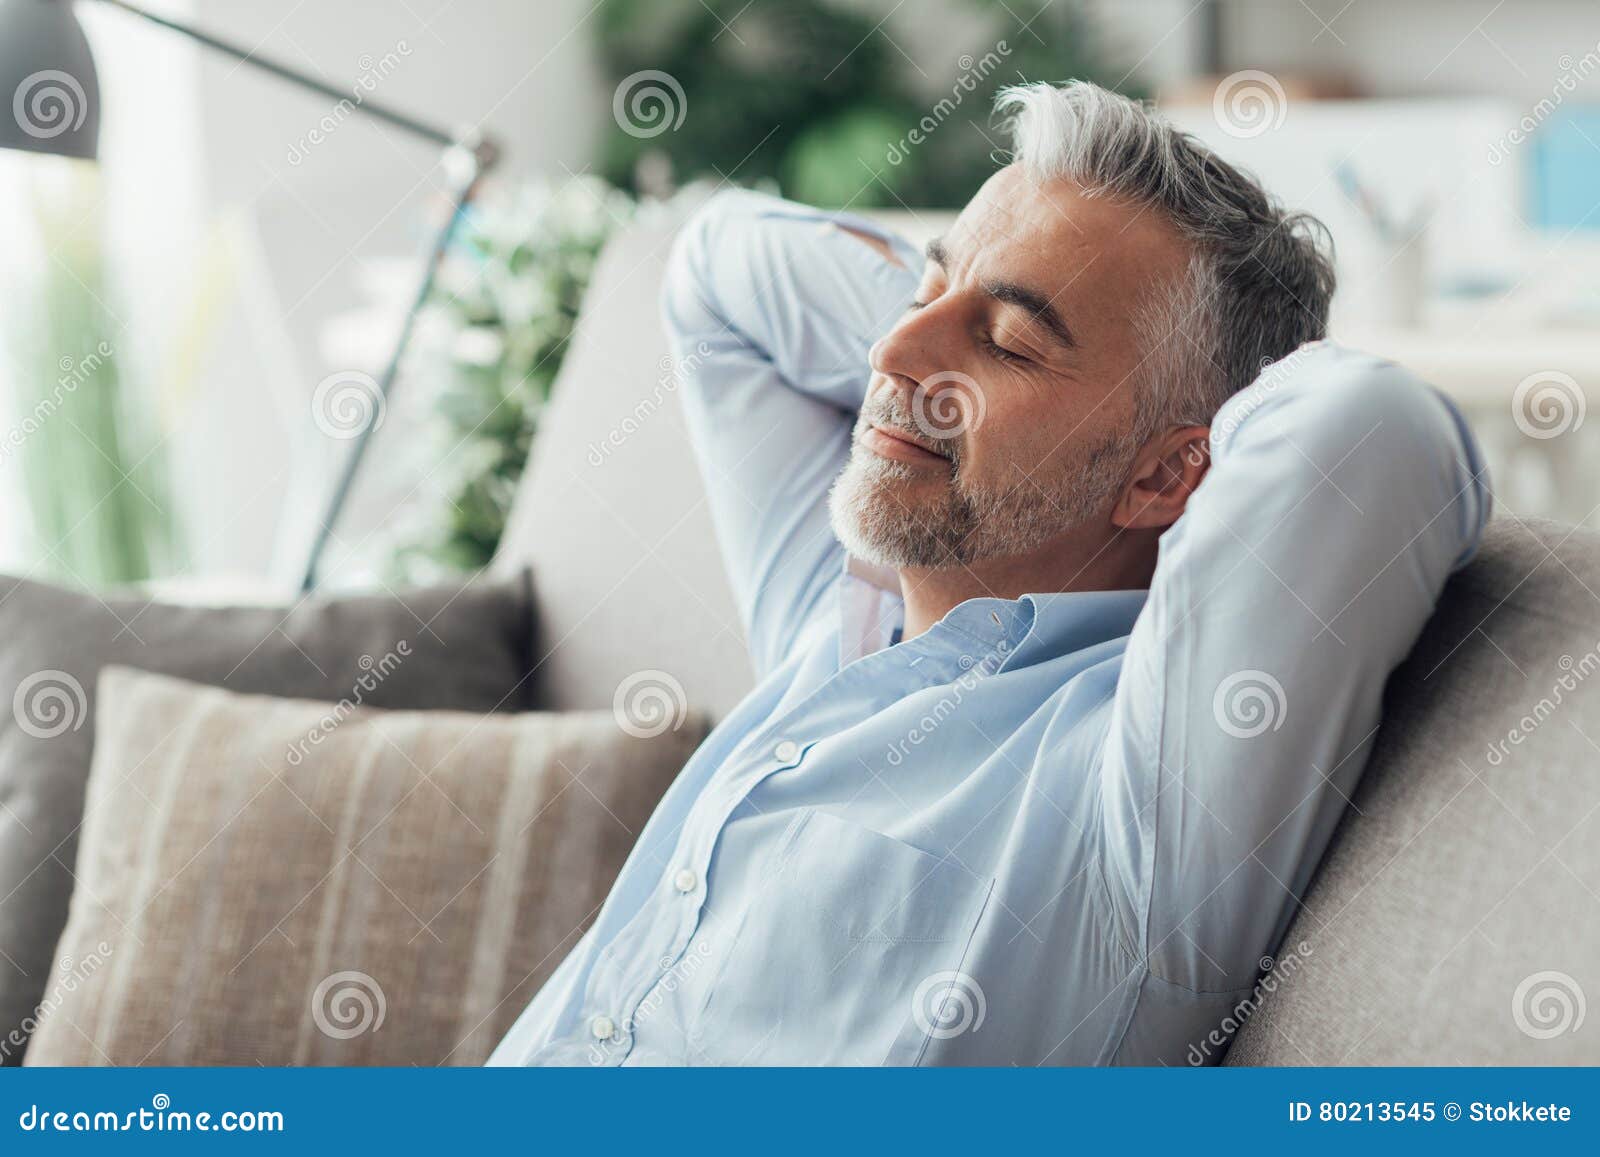 businessman sleeping on the couch